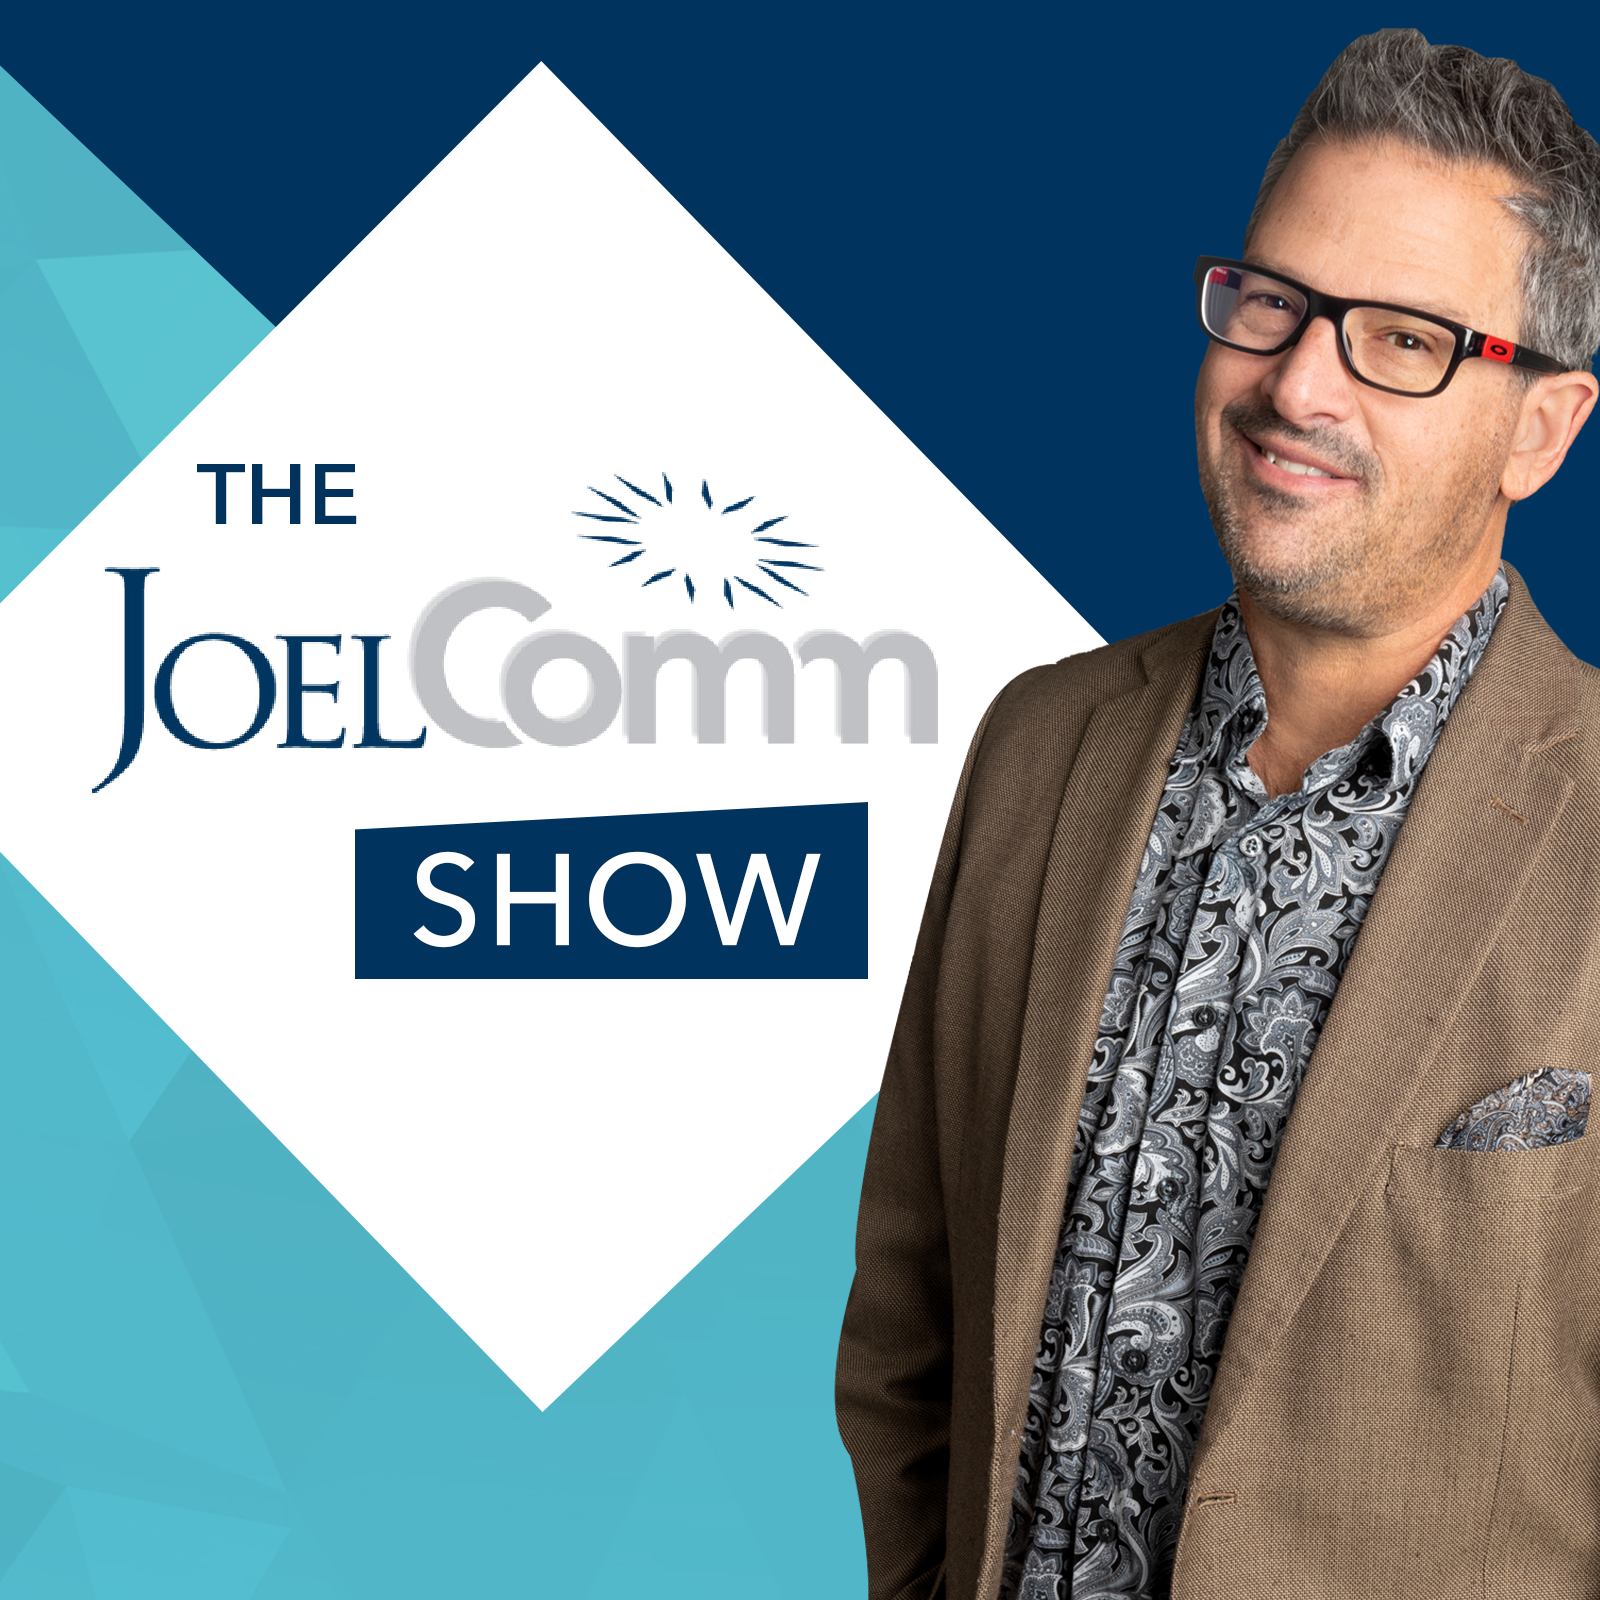 The NEW Joel Comm Show is Coming Soon!